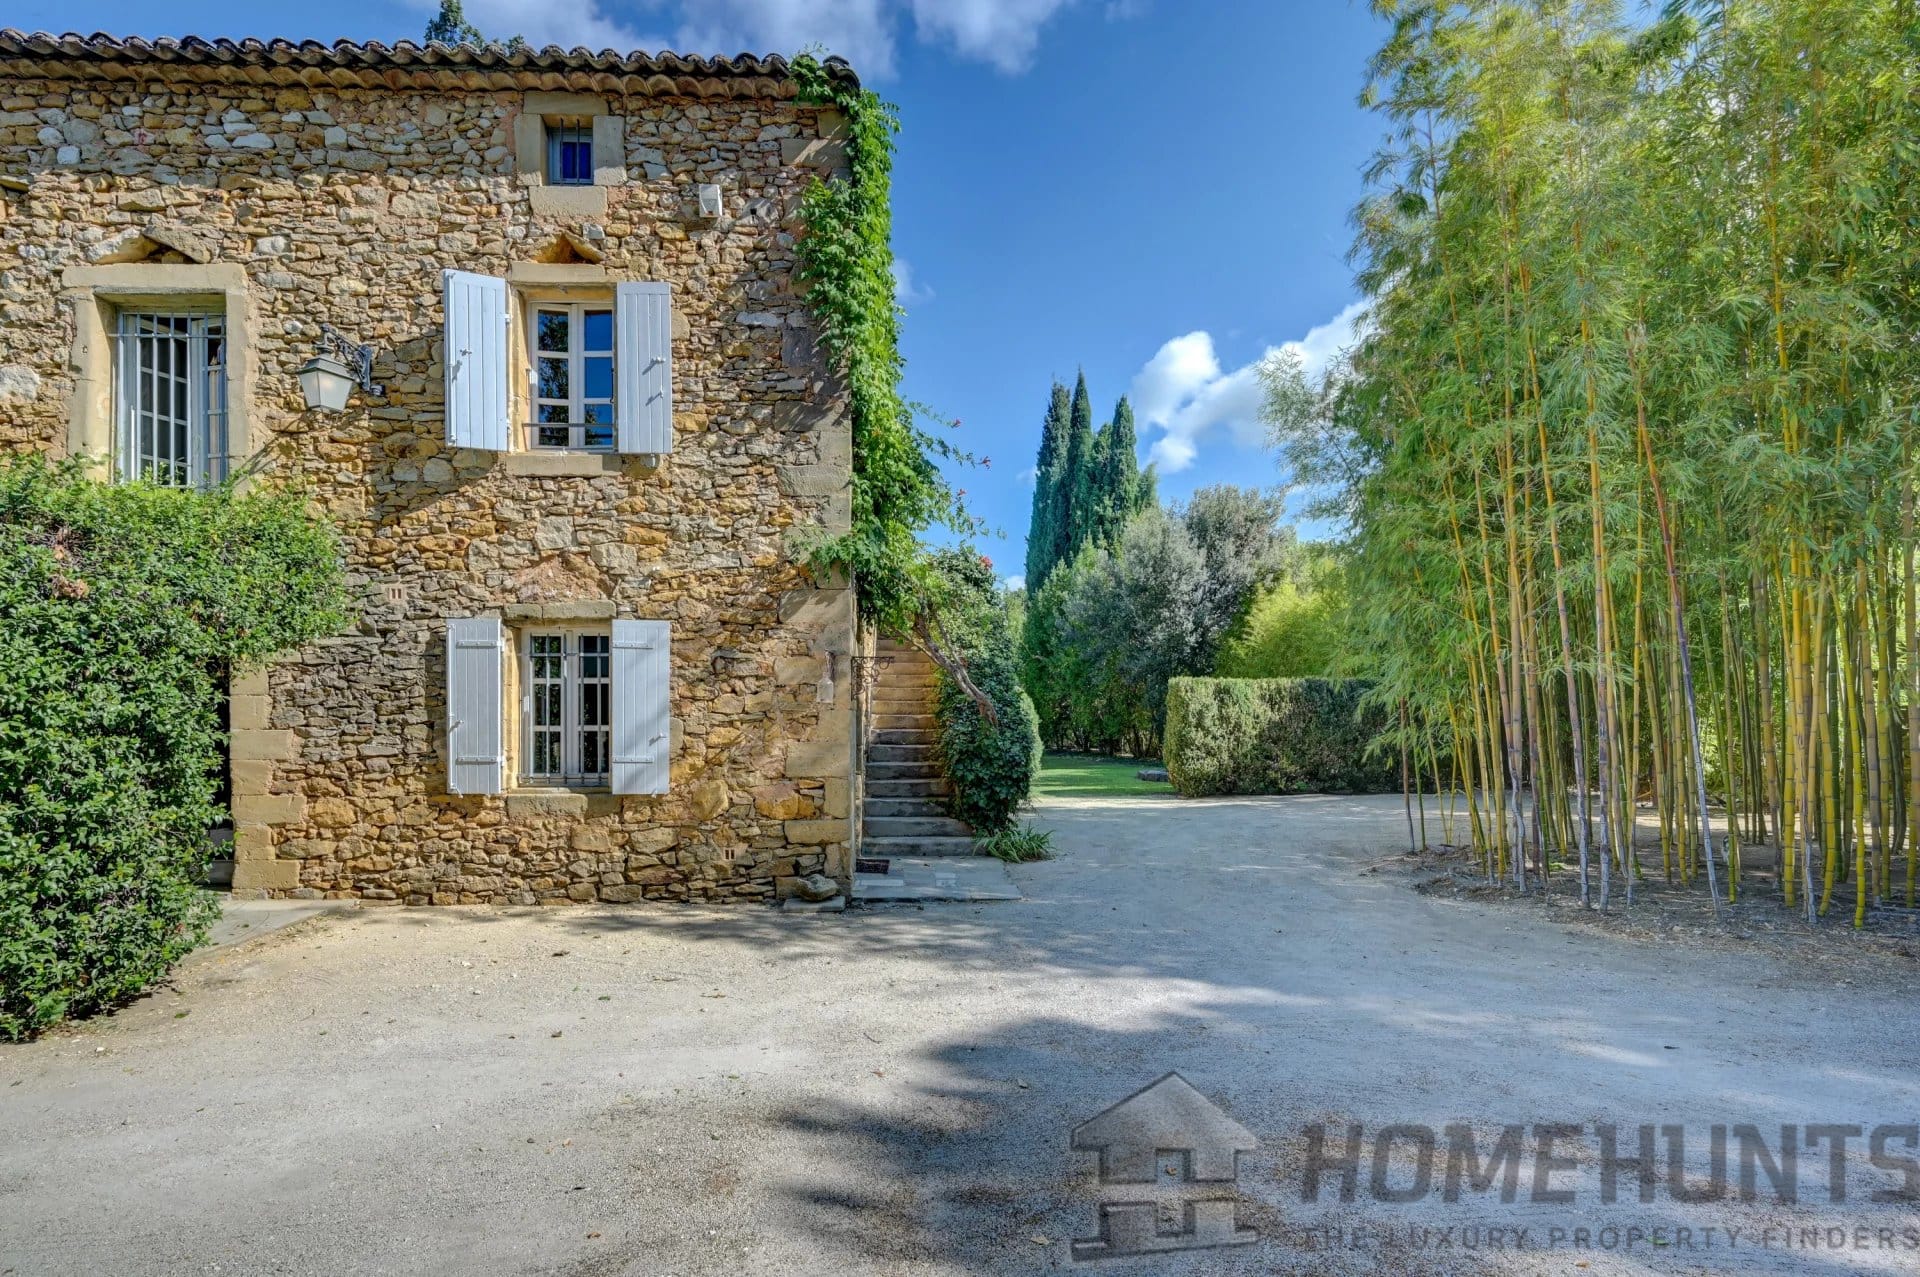 Villa/House For Sale in Uzes 16